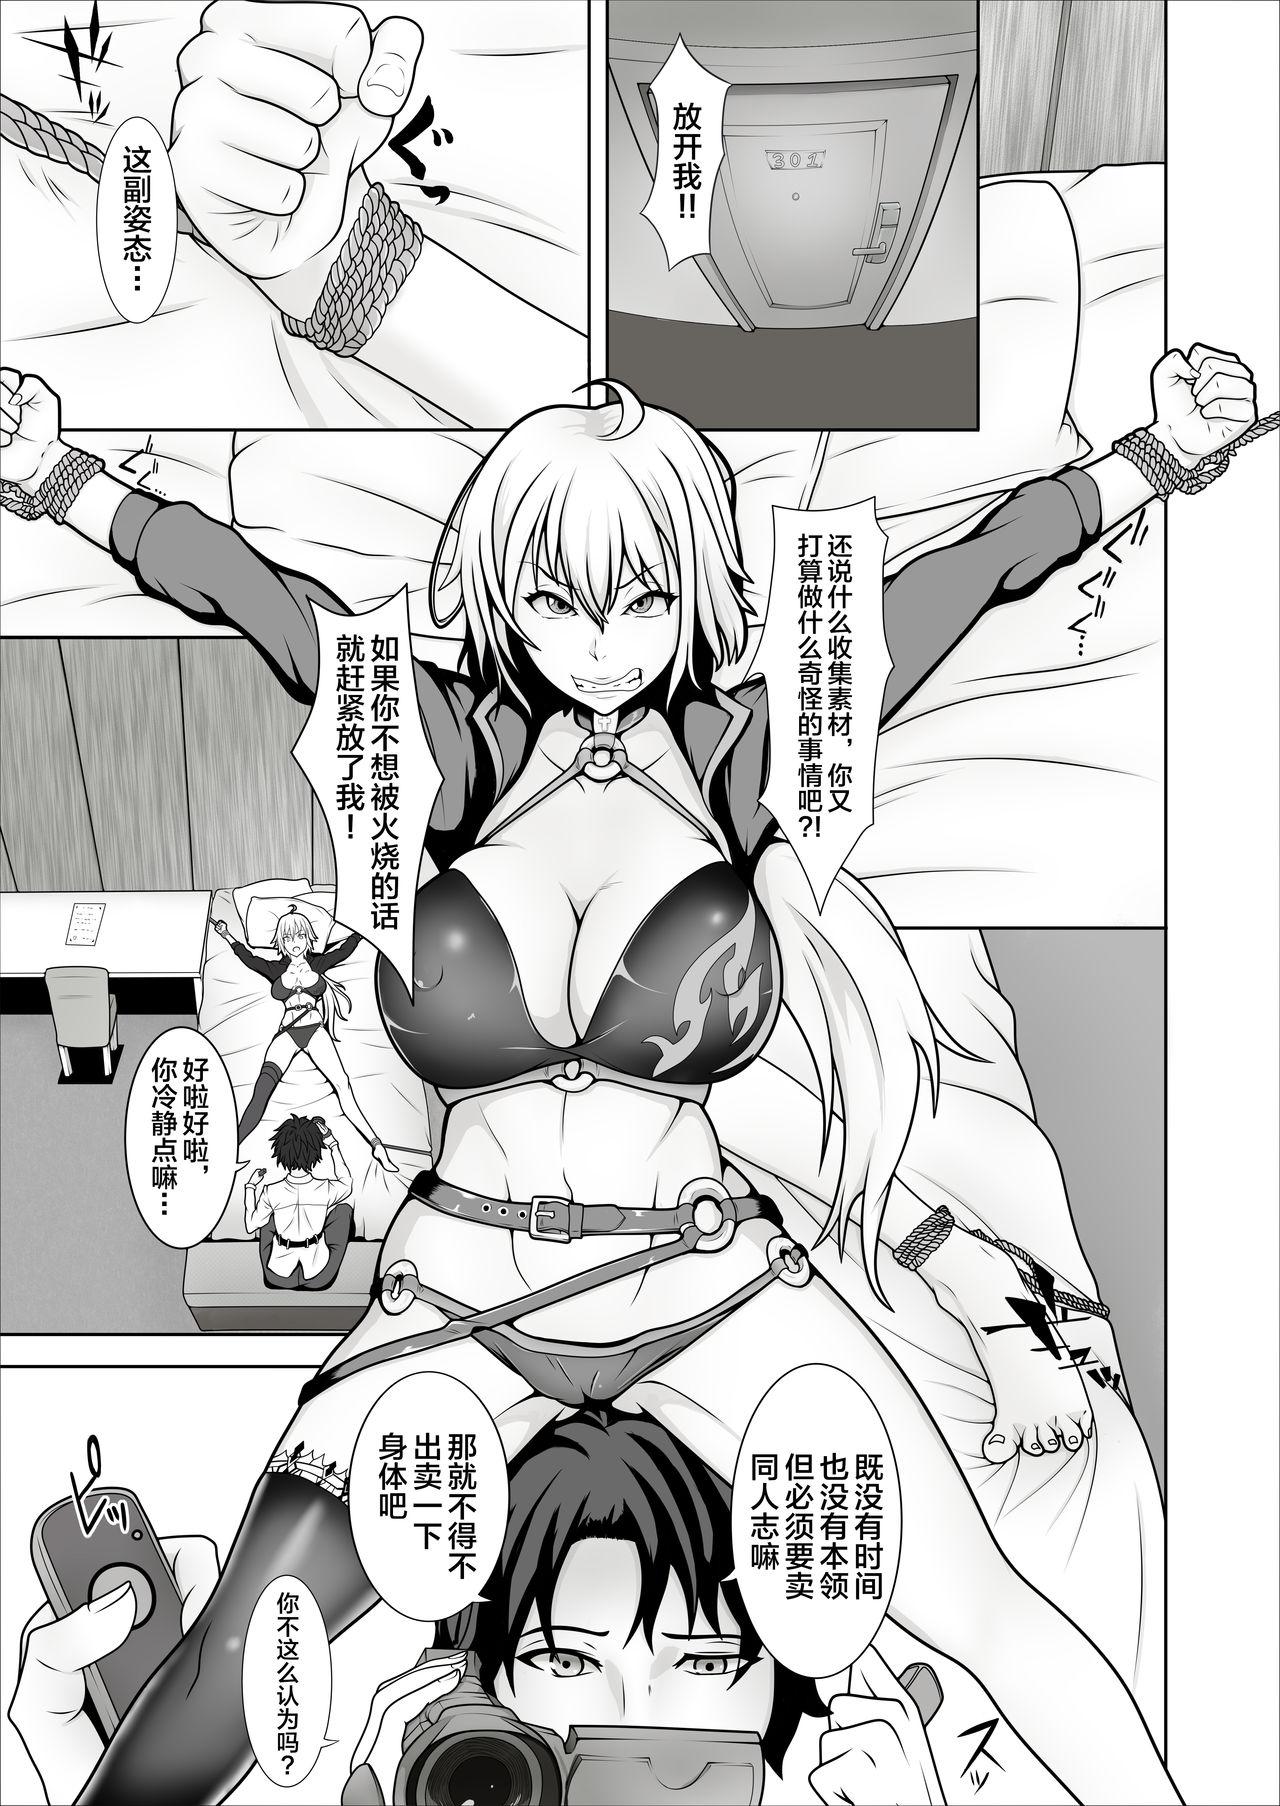 Cowgirl 俺のジャンヌは性処理係 - Fate grand order Free Hardcore - Page 11